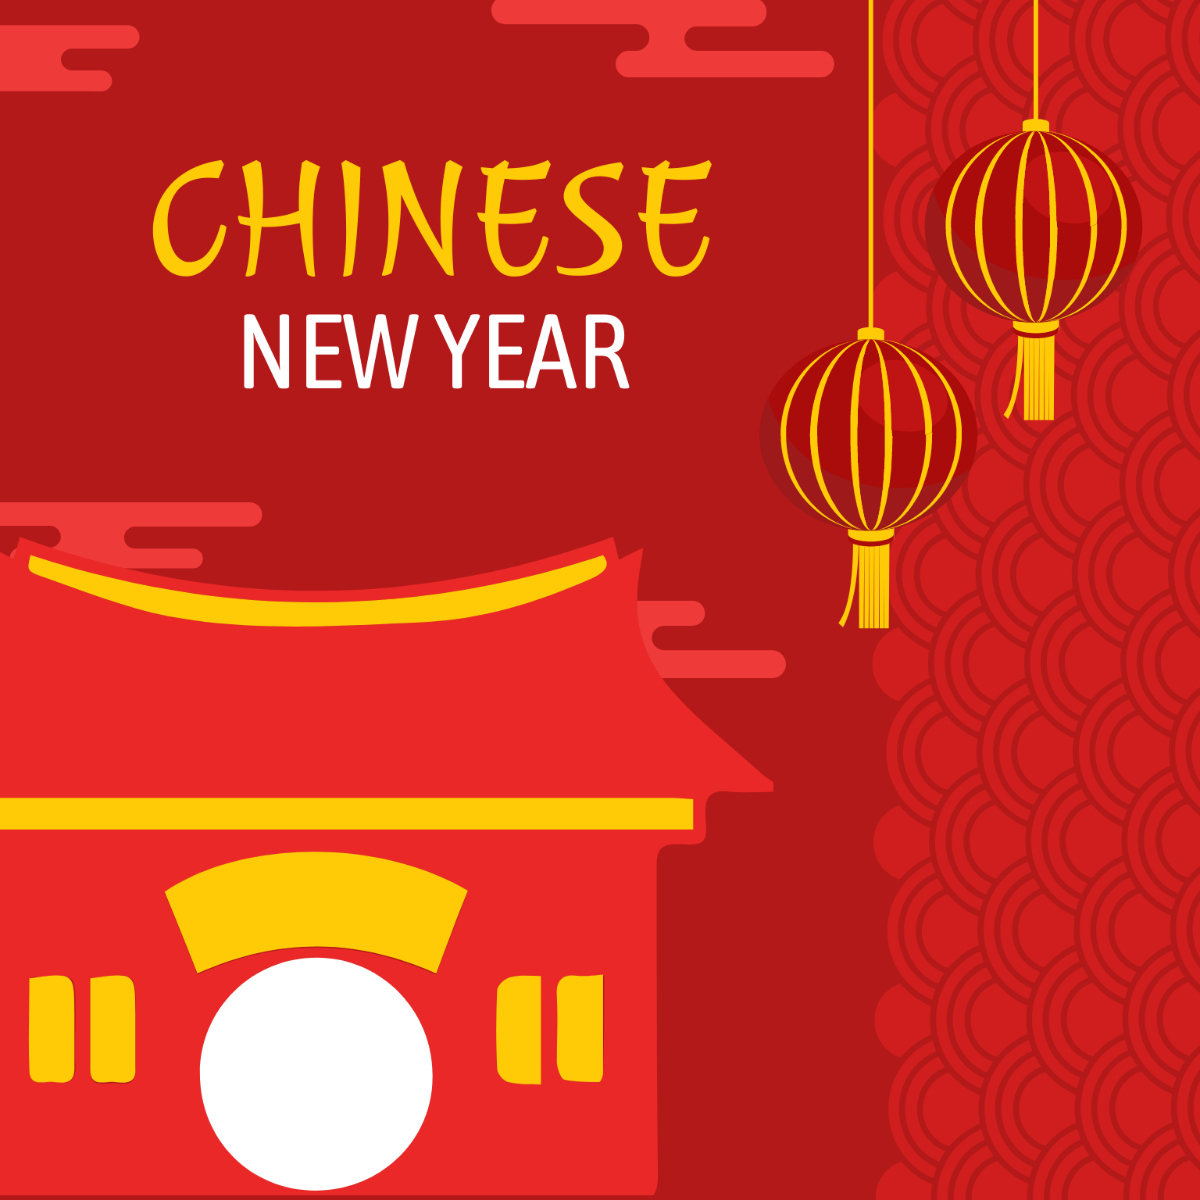 Free Chinese New Year Illustration Template